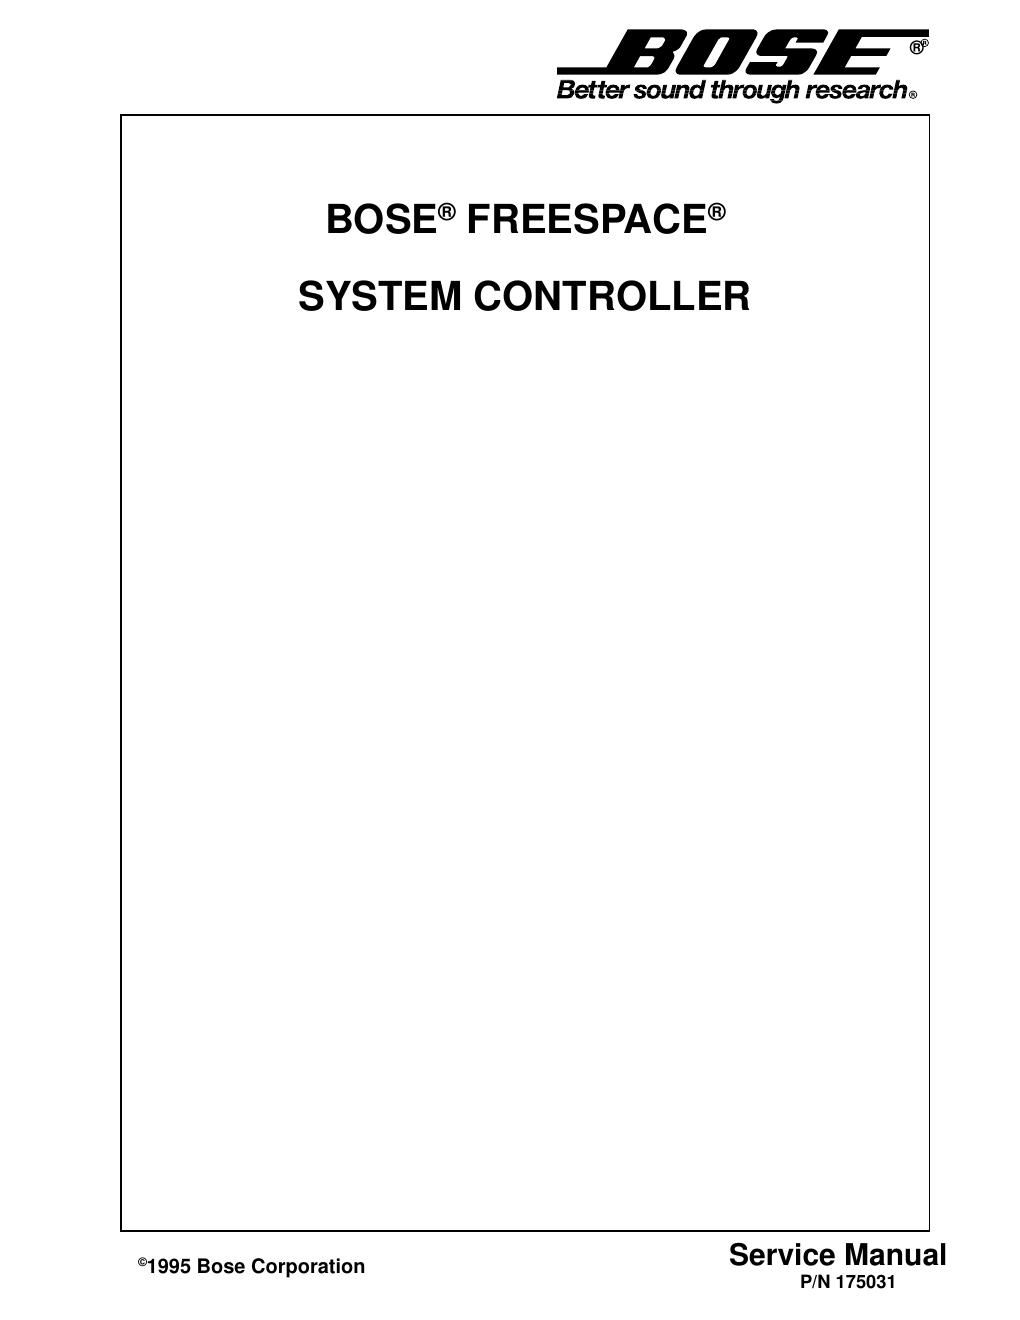 bose freespace business system controller